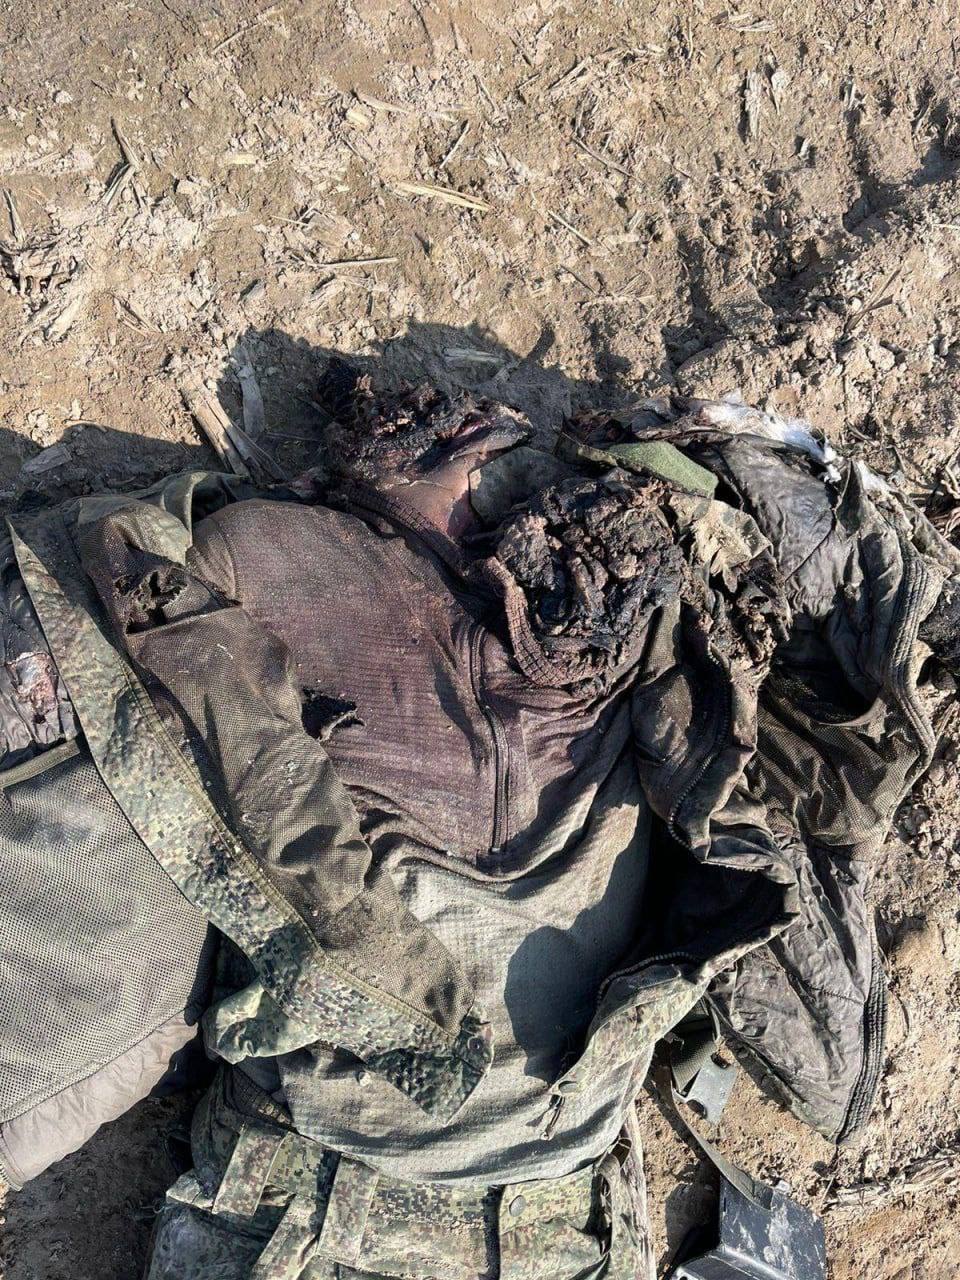 Unidentified remains in Russian military uniform